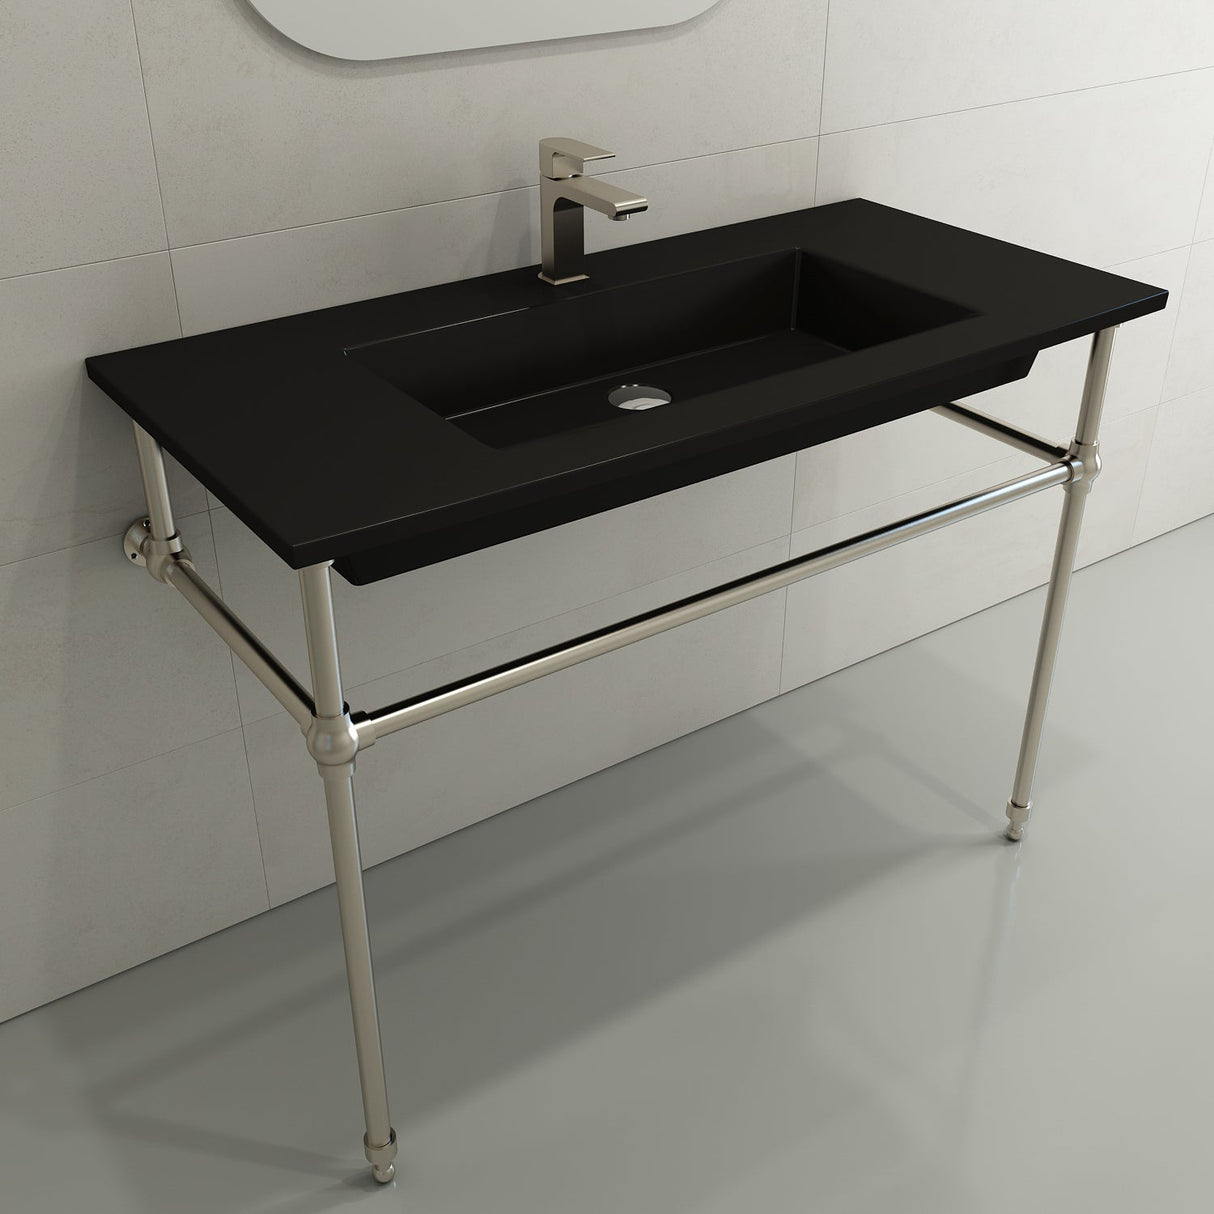 BOCCHI 1105-004-0126 Ravenna Wall-Mounted Sink Fireclay 40.5 in. 1-Hole with Overflow in Matte Black